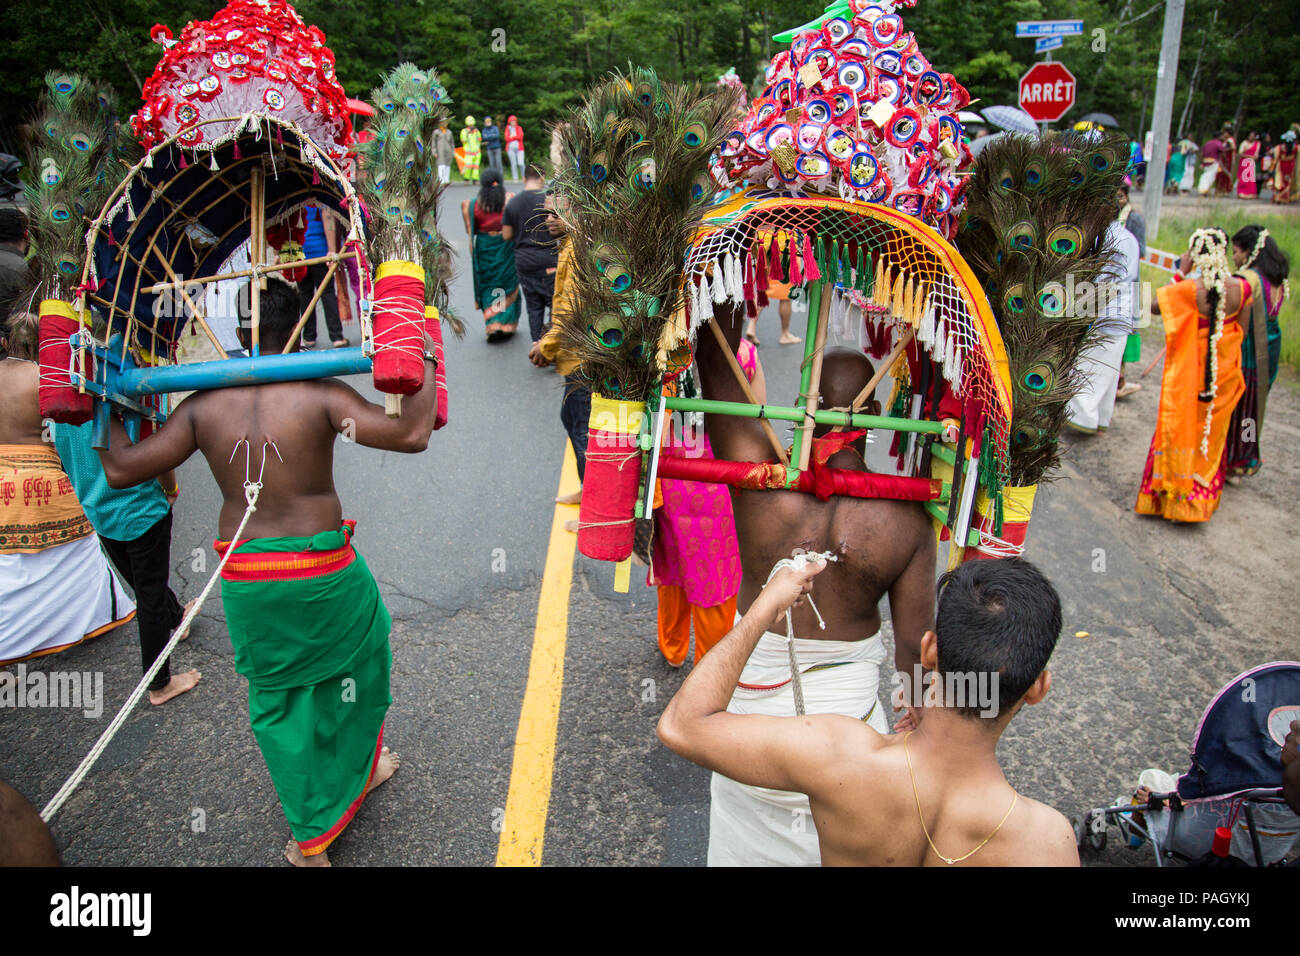 Val-Morin, Canada, July 22, 2018. Hindu devotees carrying kaavadis on their shoulders while hooks are piercing their skin at the Kaavadi festival in Val Morin, Quebec. Hundreds of Hindu devotees gathered for the annual celebration of Lord Subramanya (or Muruga), the Hindu god of war. Several devotees are suspended by hooks and needles are piercing their skin as a way to show penance and transcendence. Credit: Cristian Mijea/Alamy Live News. Stock Photo